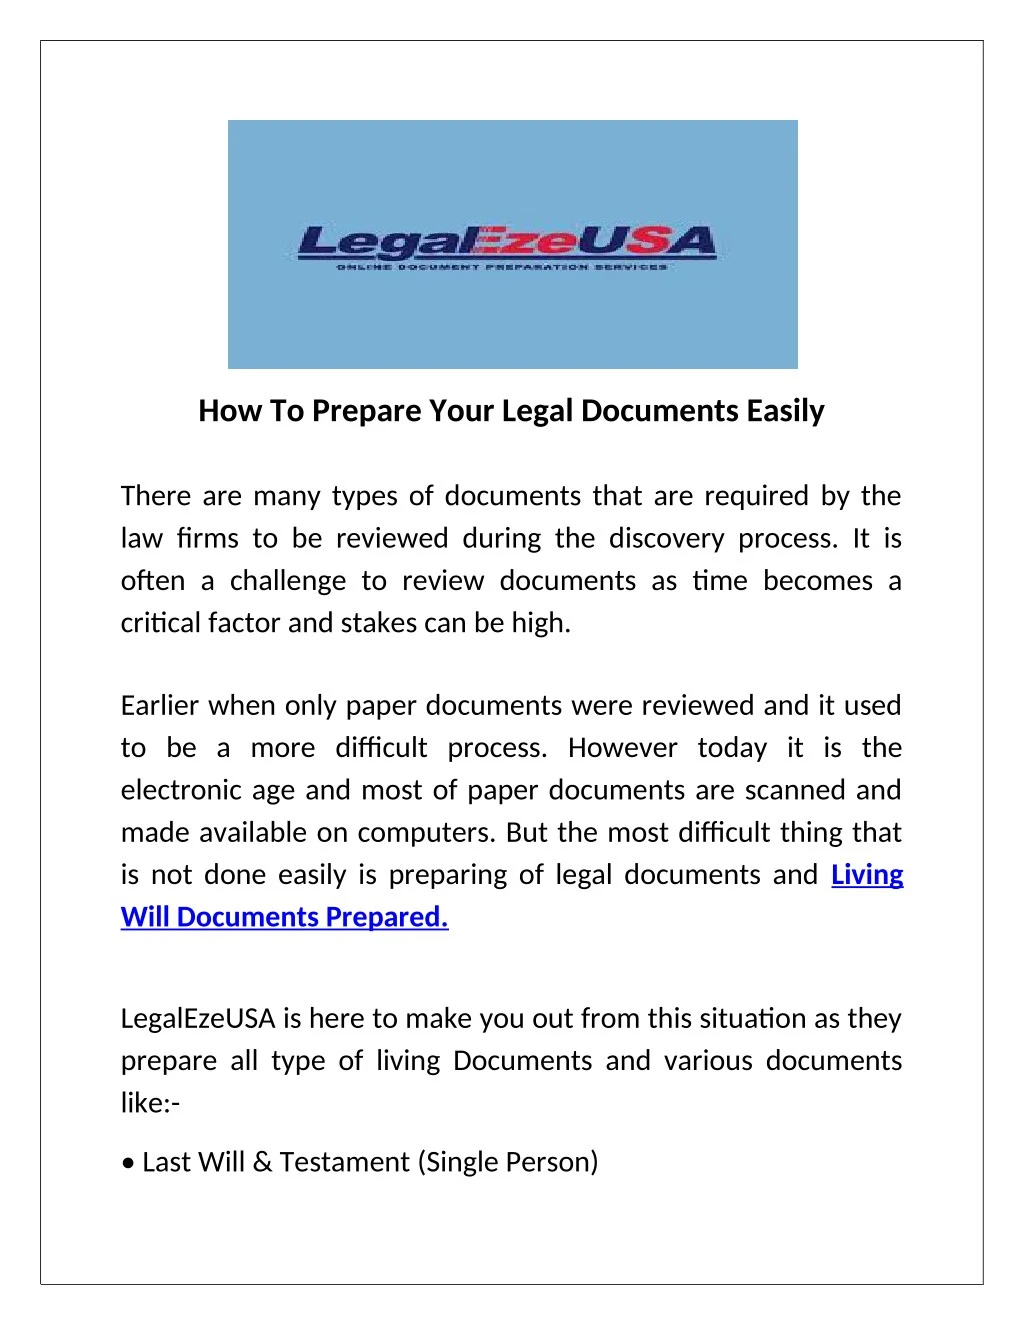 how to prepare your legal documents easily